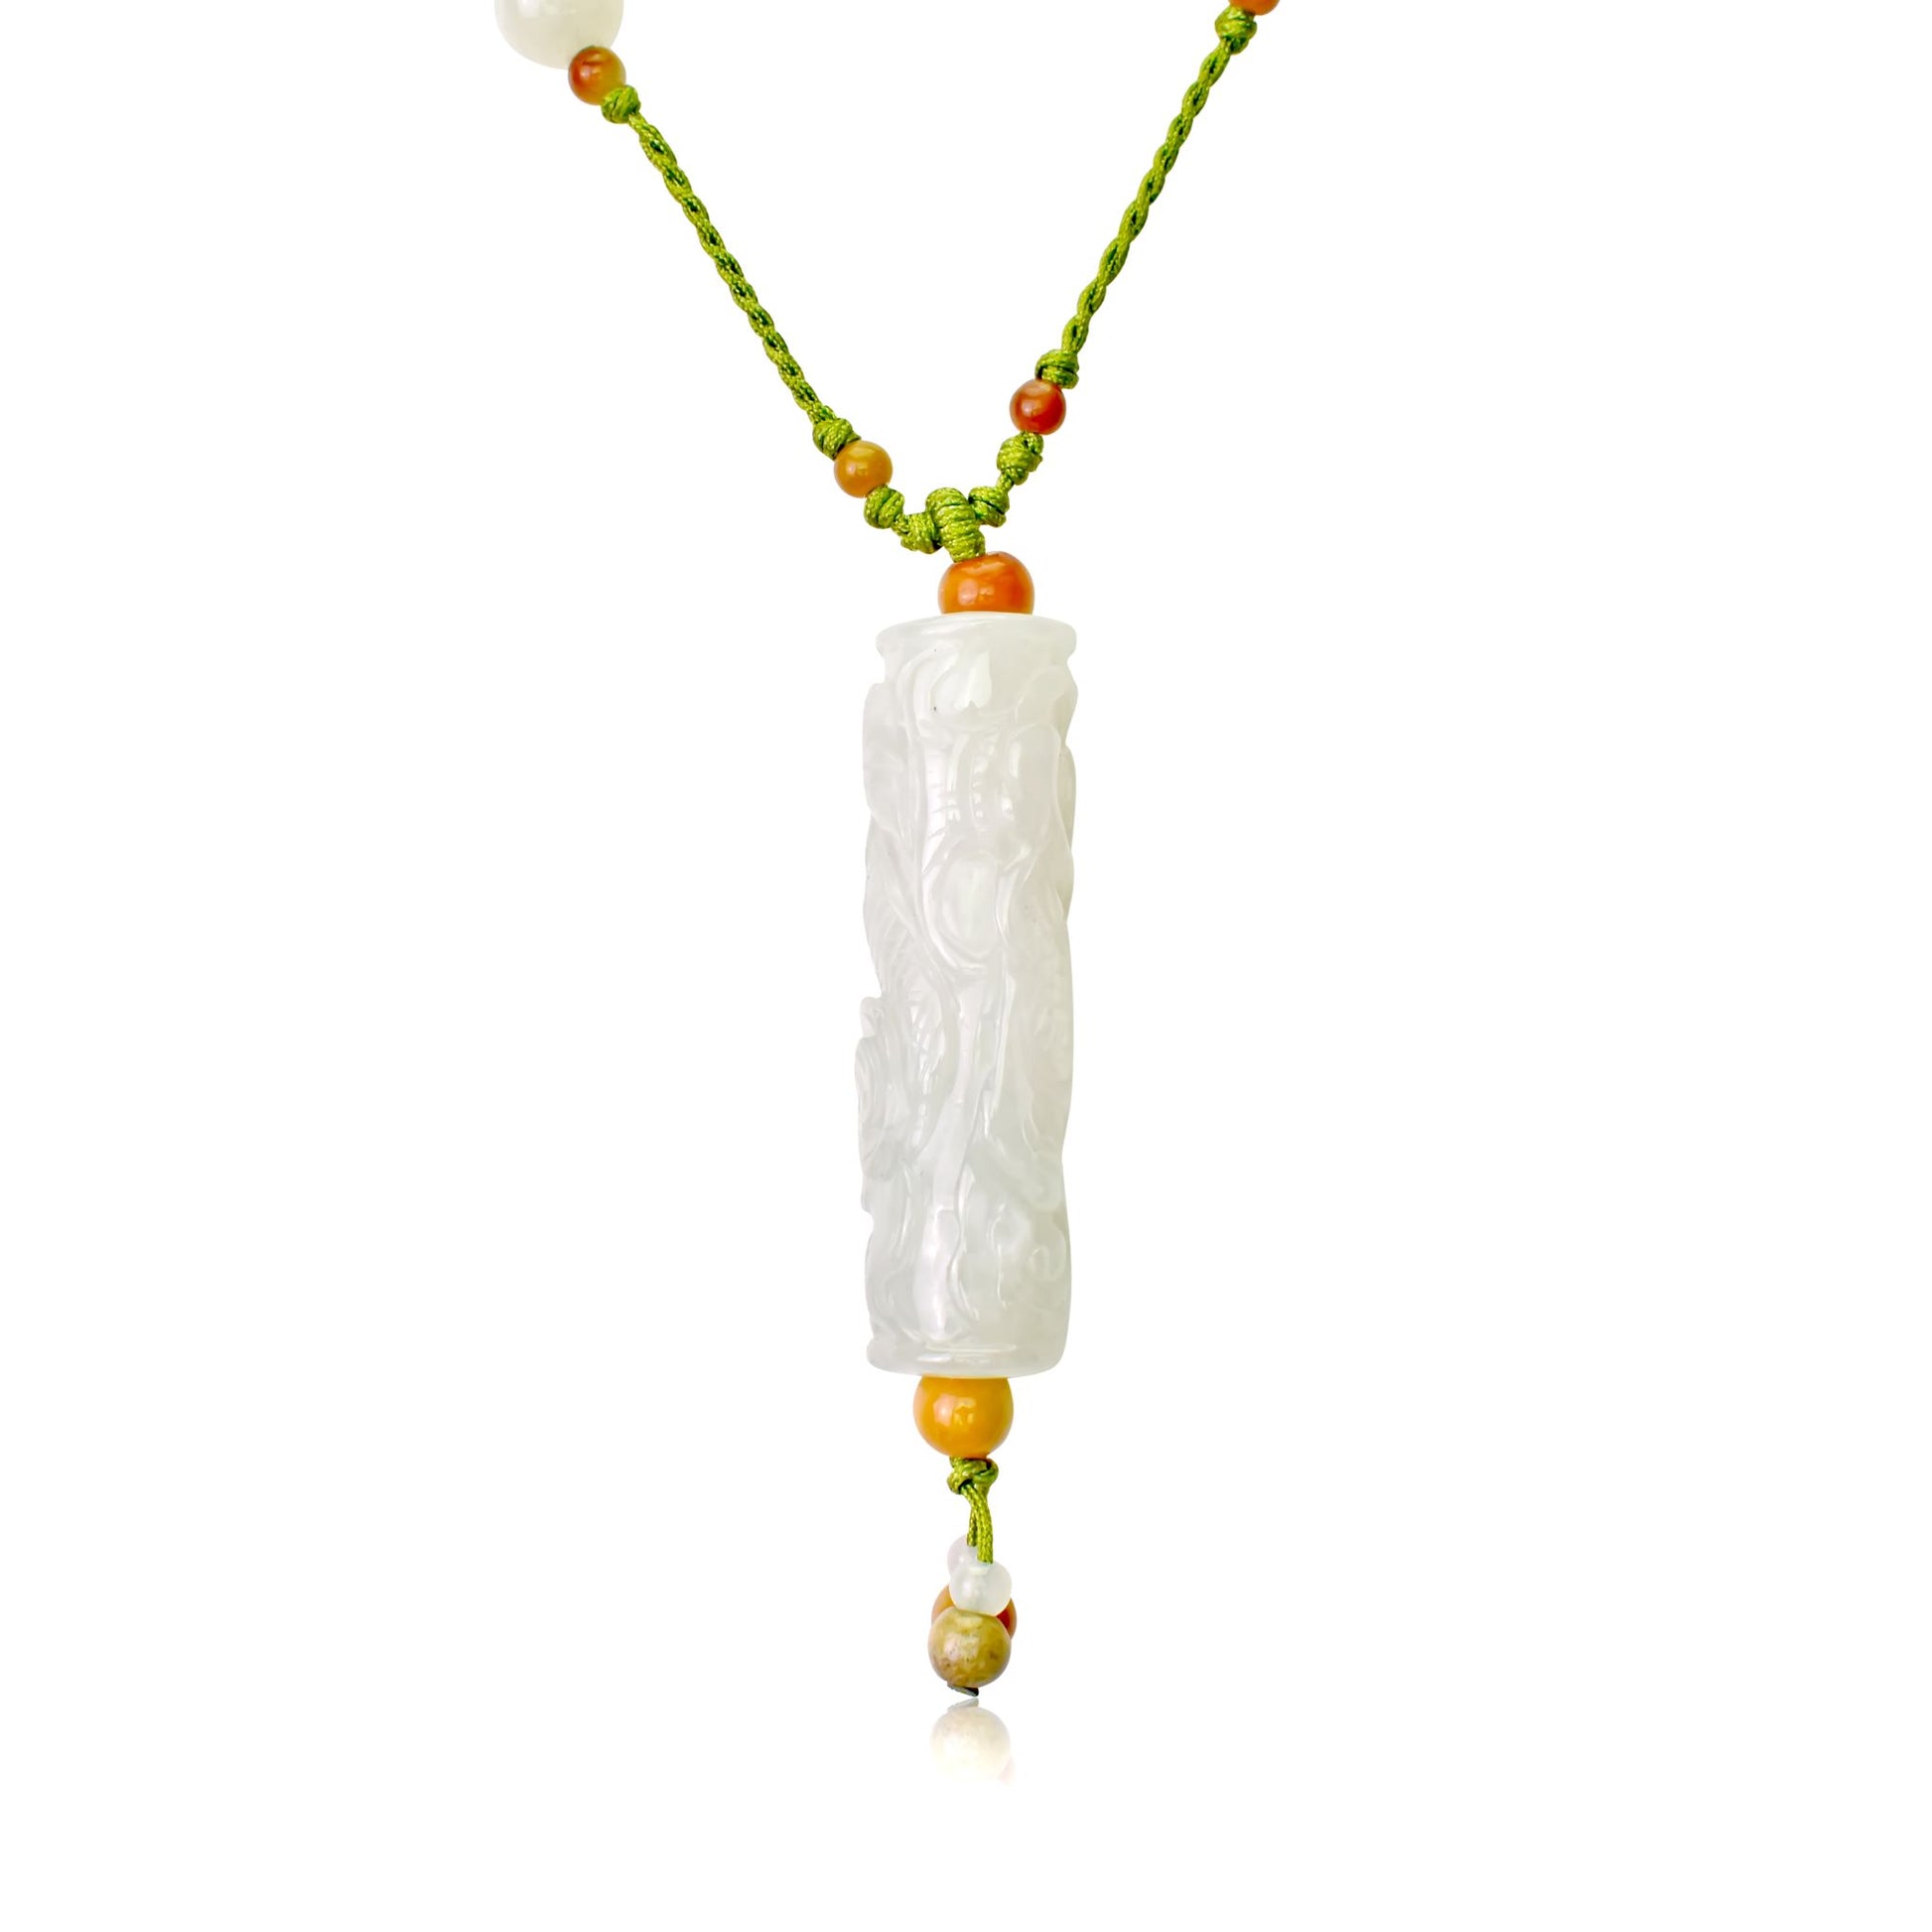 Shine with this Remarkable Masterpiece Dragon Handcrafted Jade Necklace made with Lime Cord